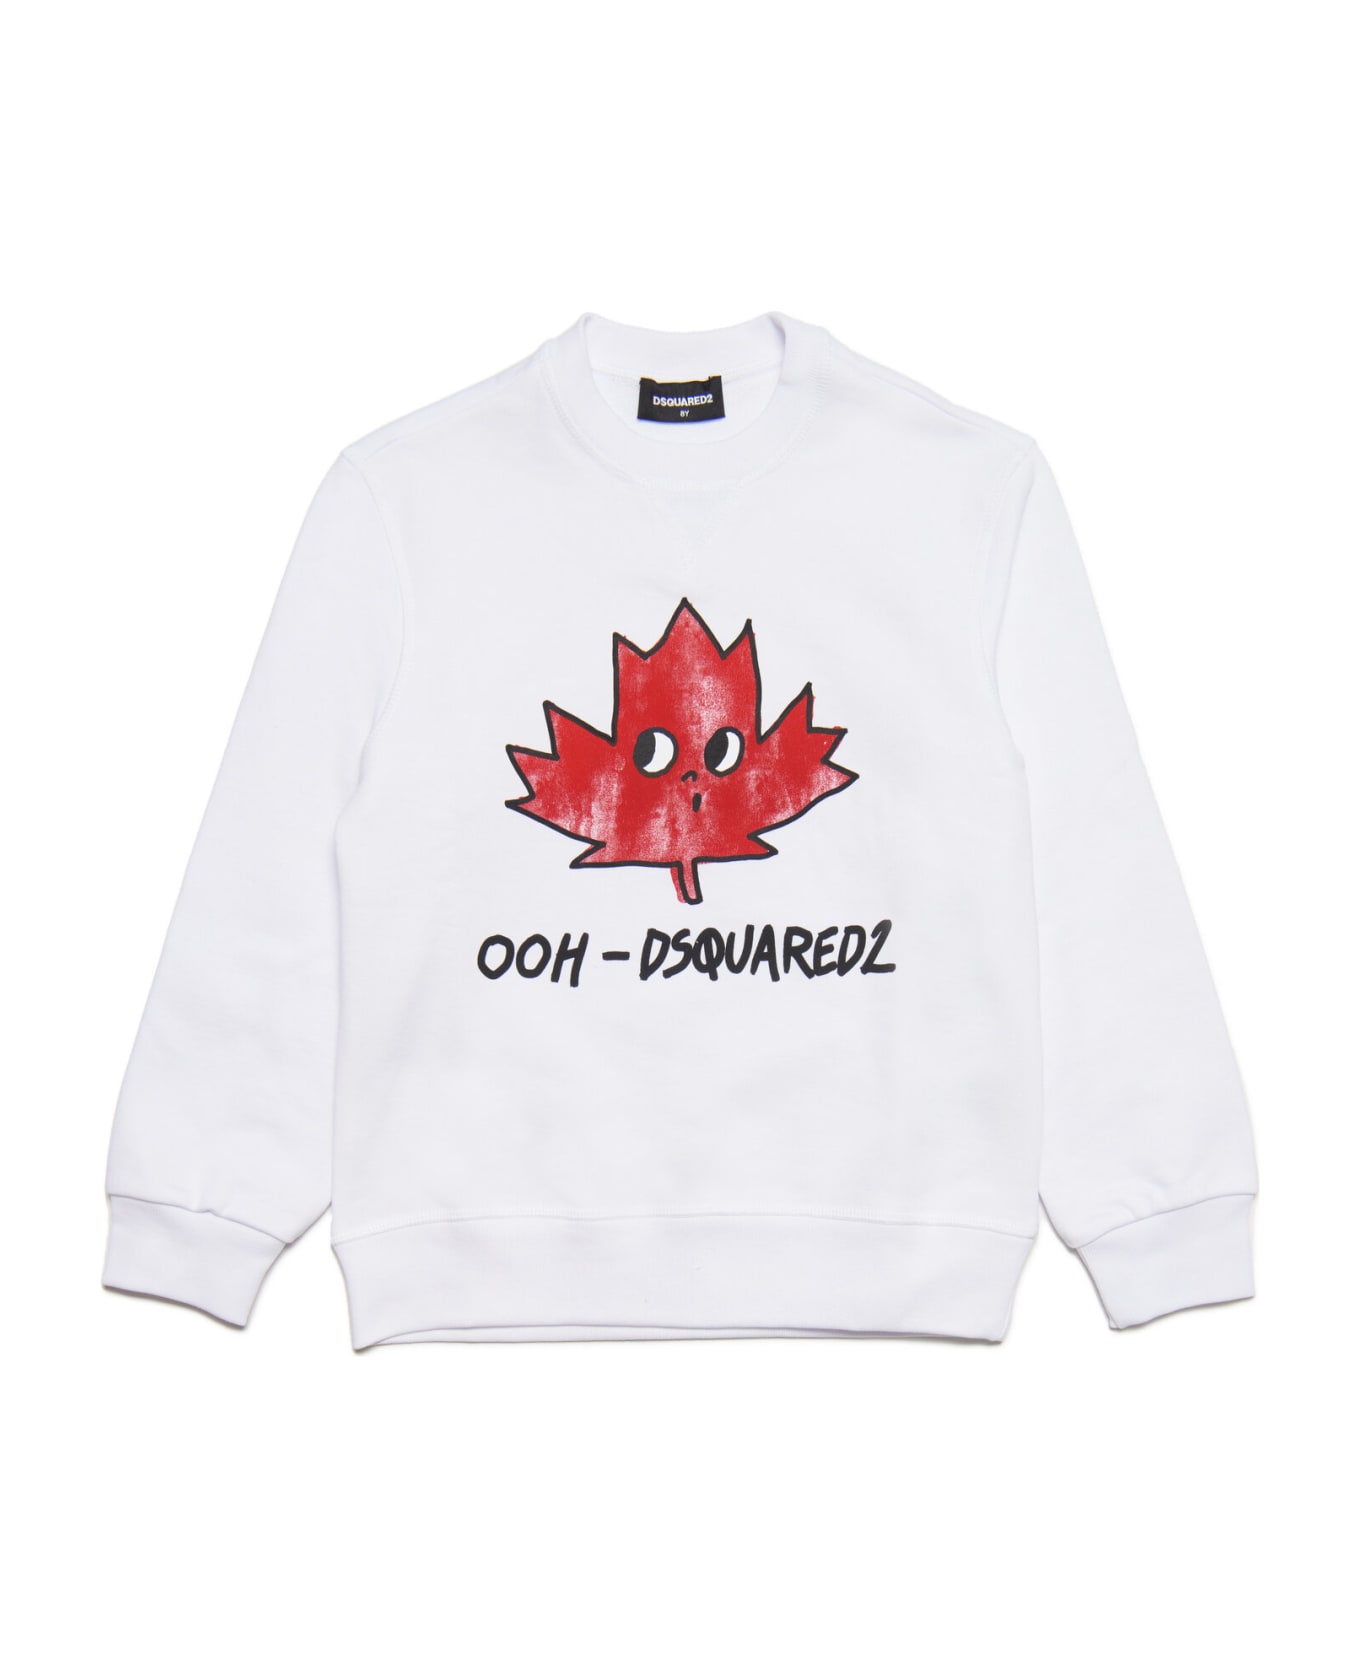 Dsquared2 D2s695u Relax Sweat-shirt Dsquared White Compass Sweatshirt With Maple Leaf - White